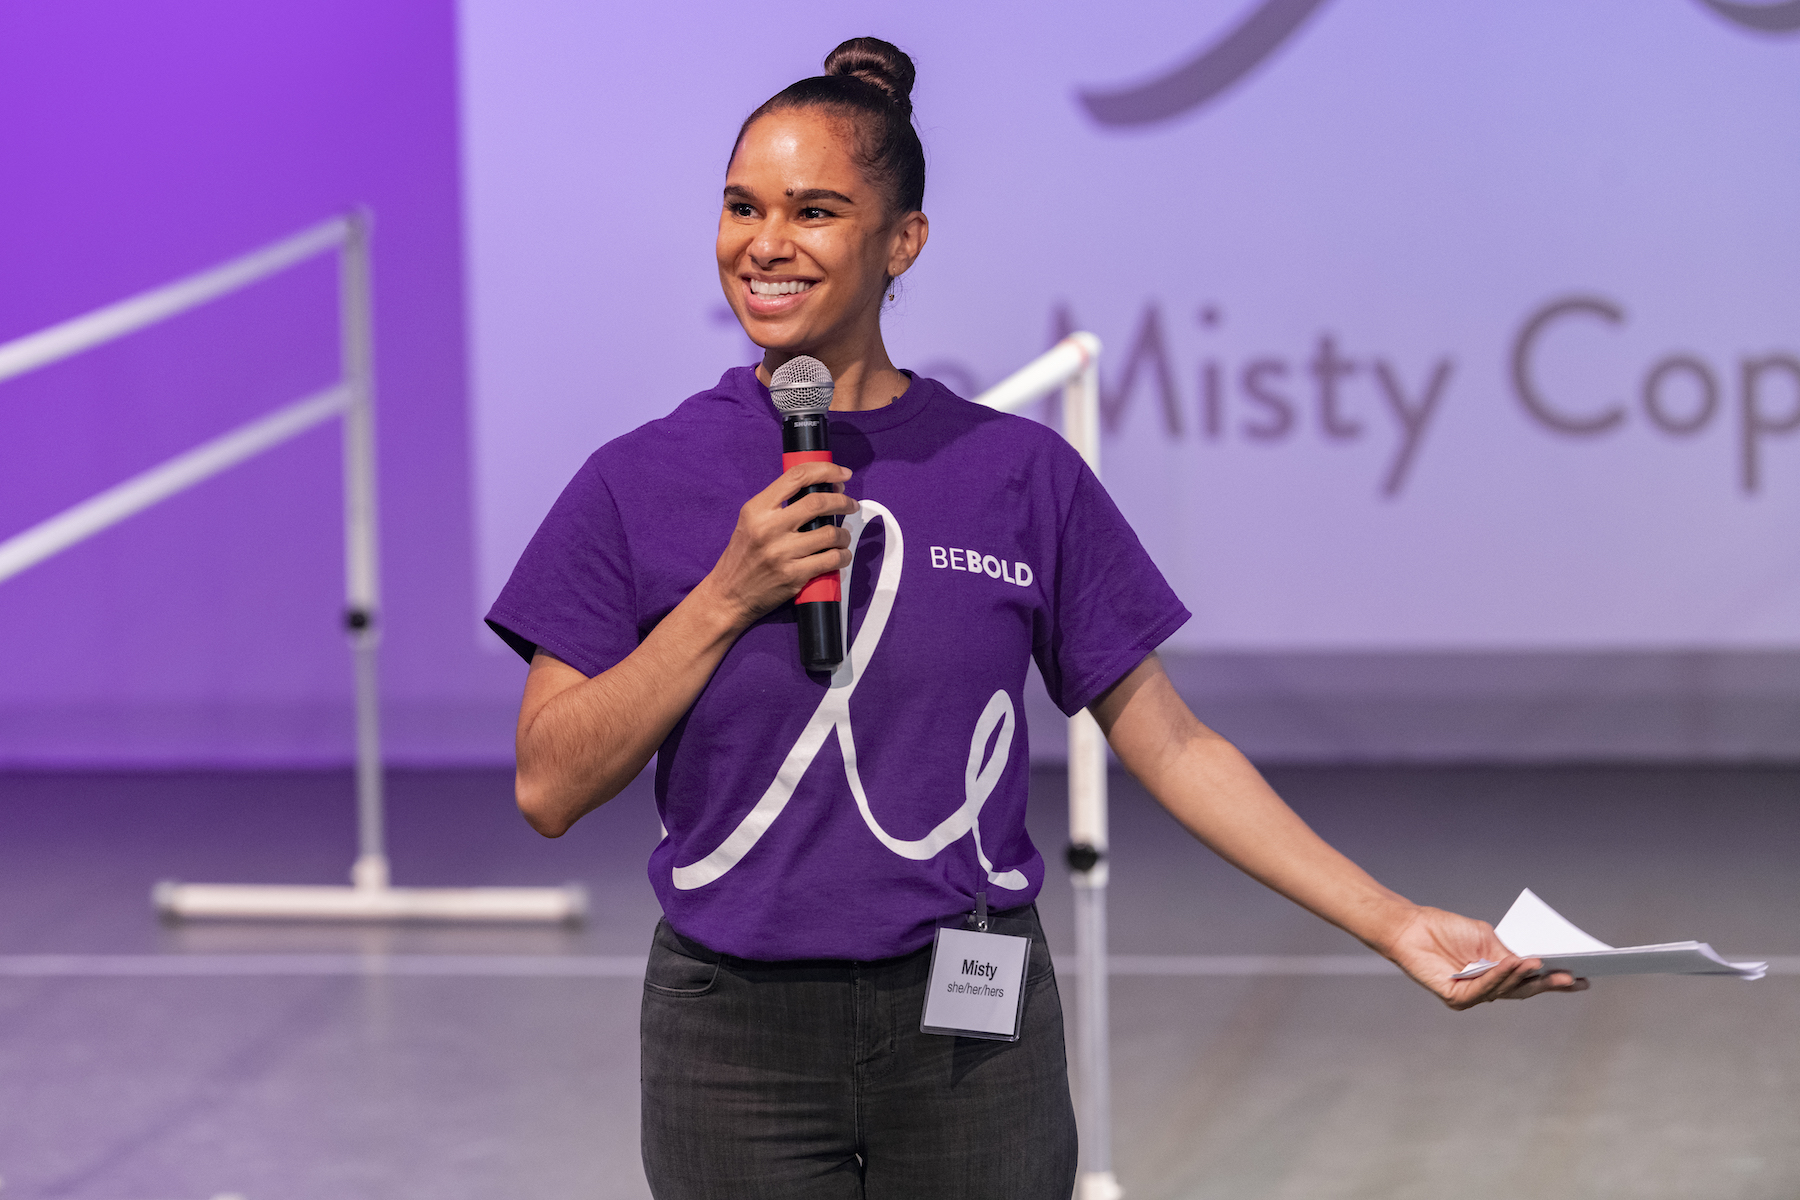 Misty Copeland wearing a purple tshirt and holding a mic